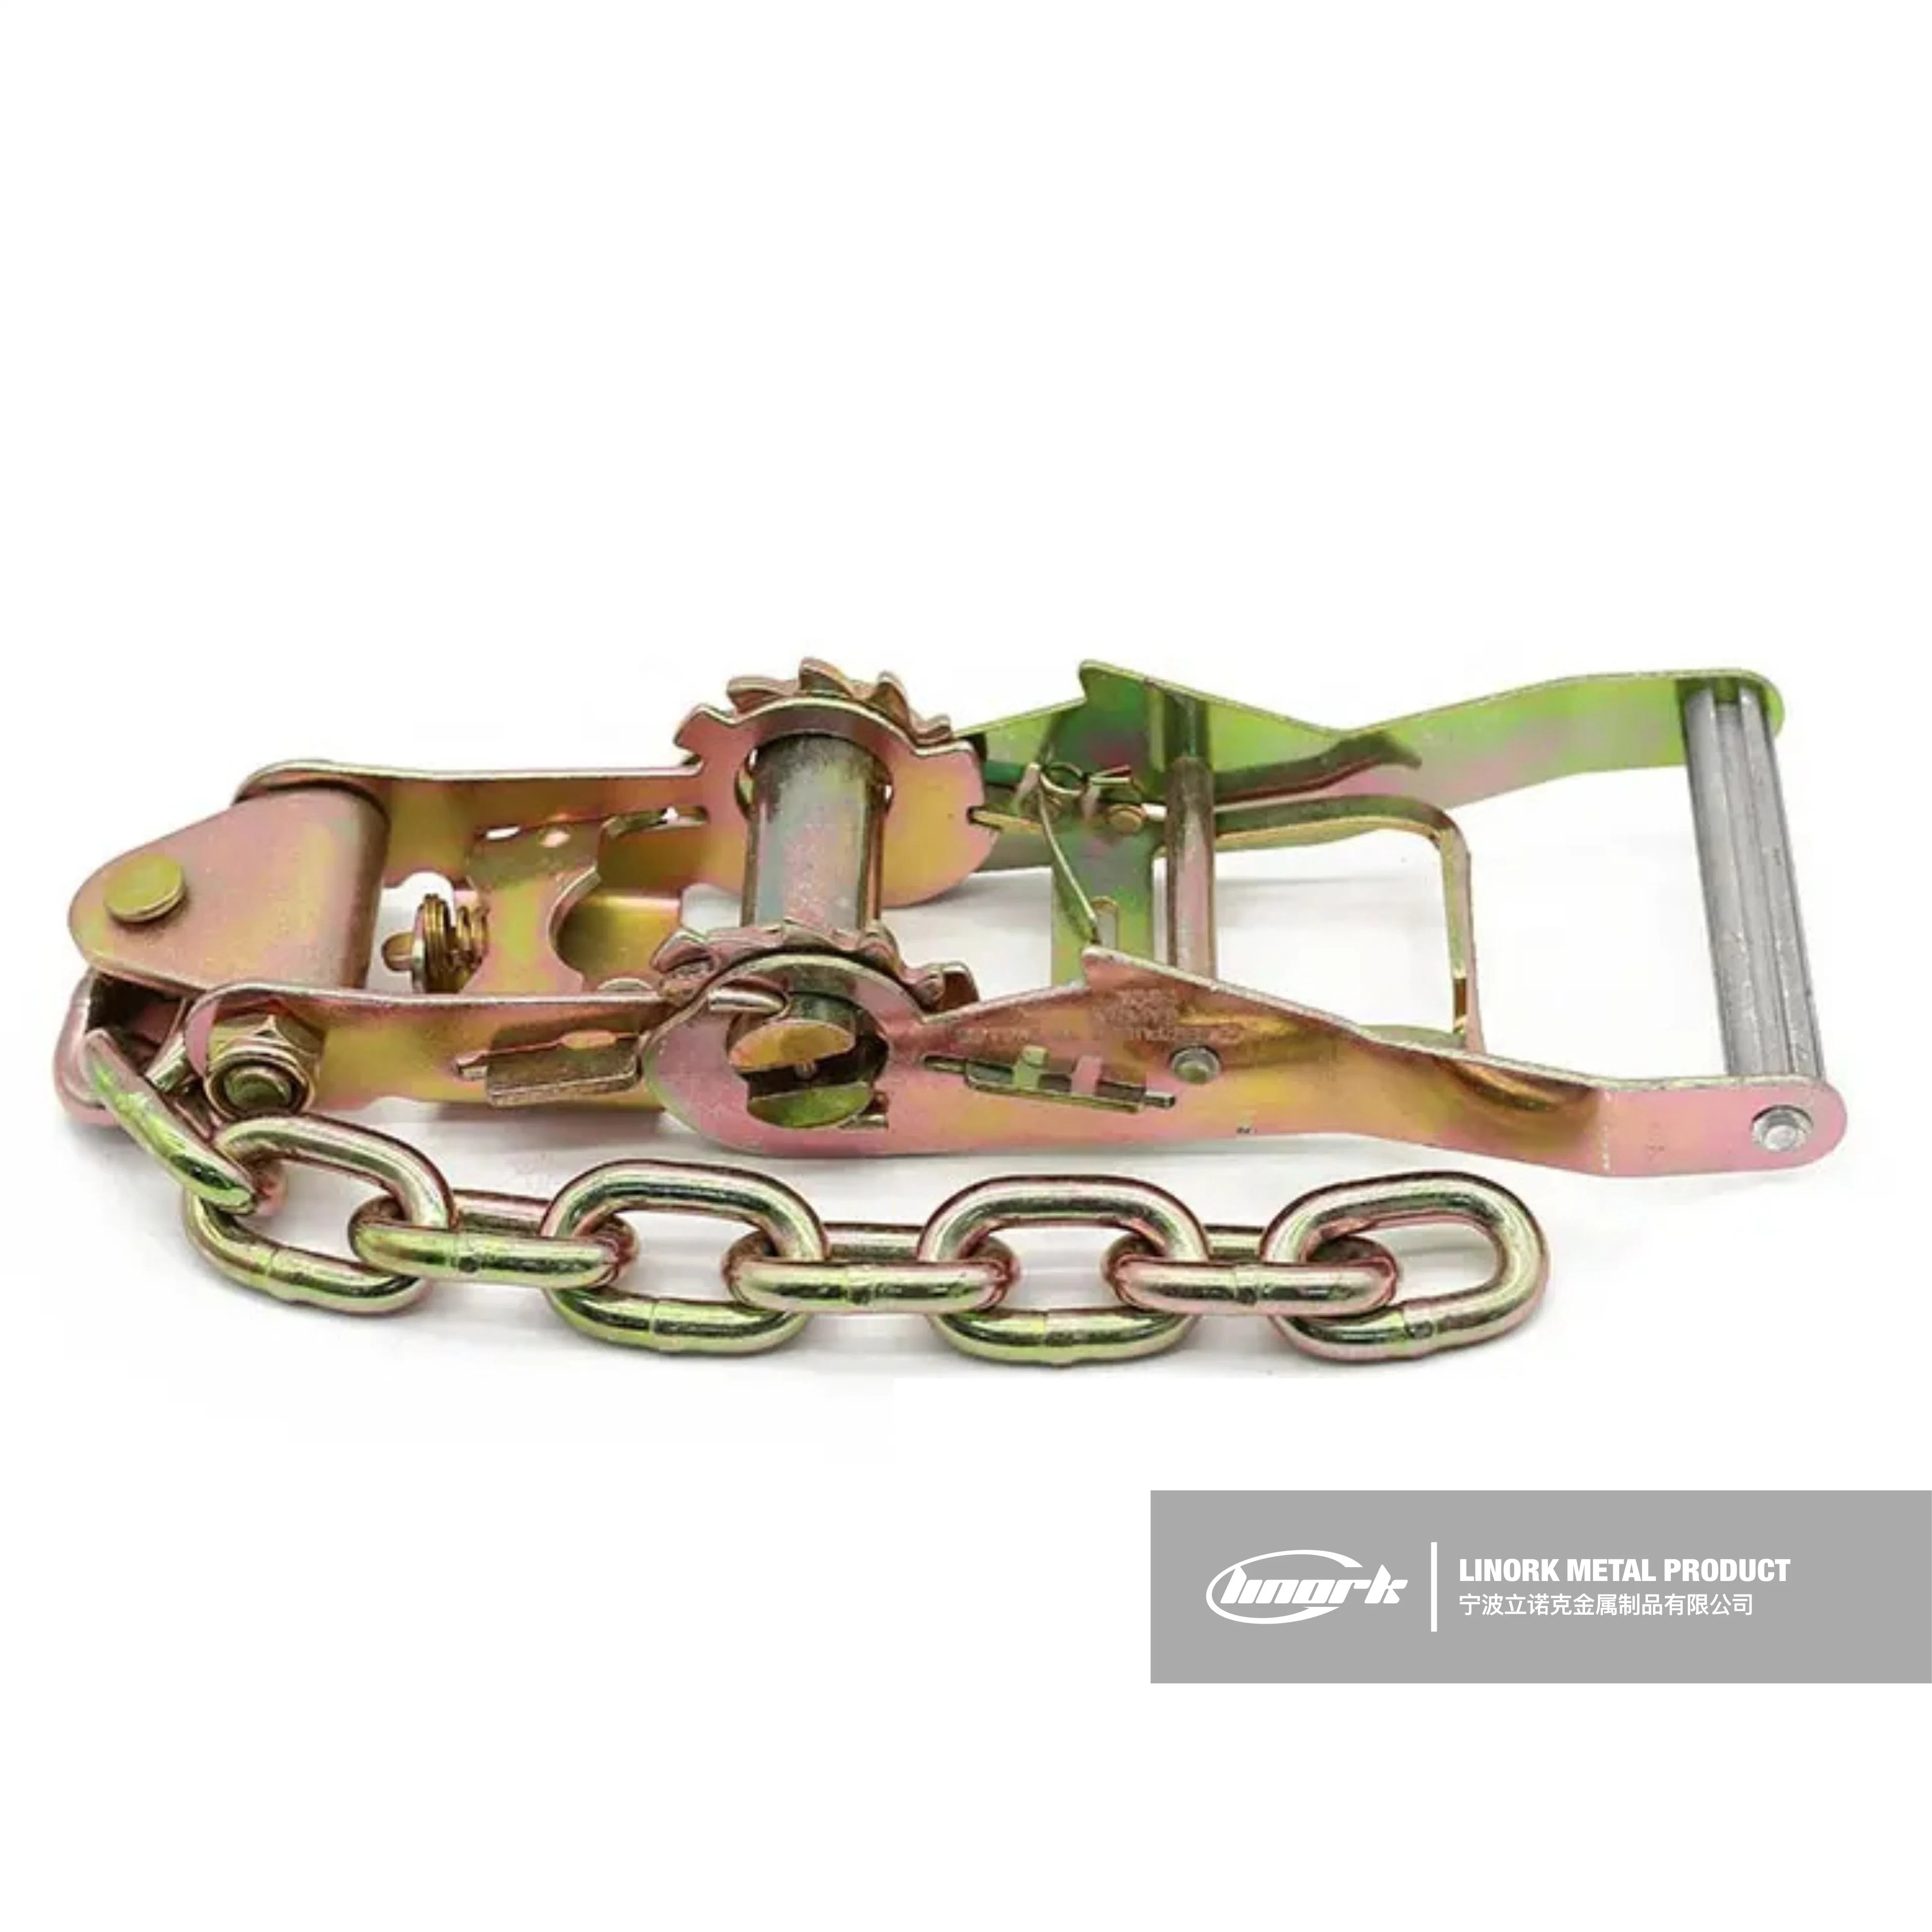 2" Standard Ratchet Buckle with 13" Chain End Hardware Made in China